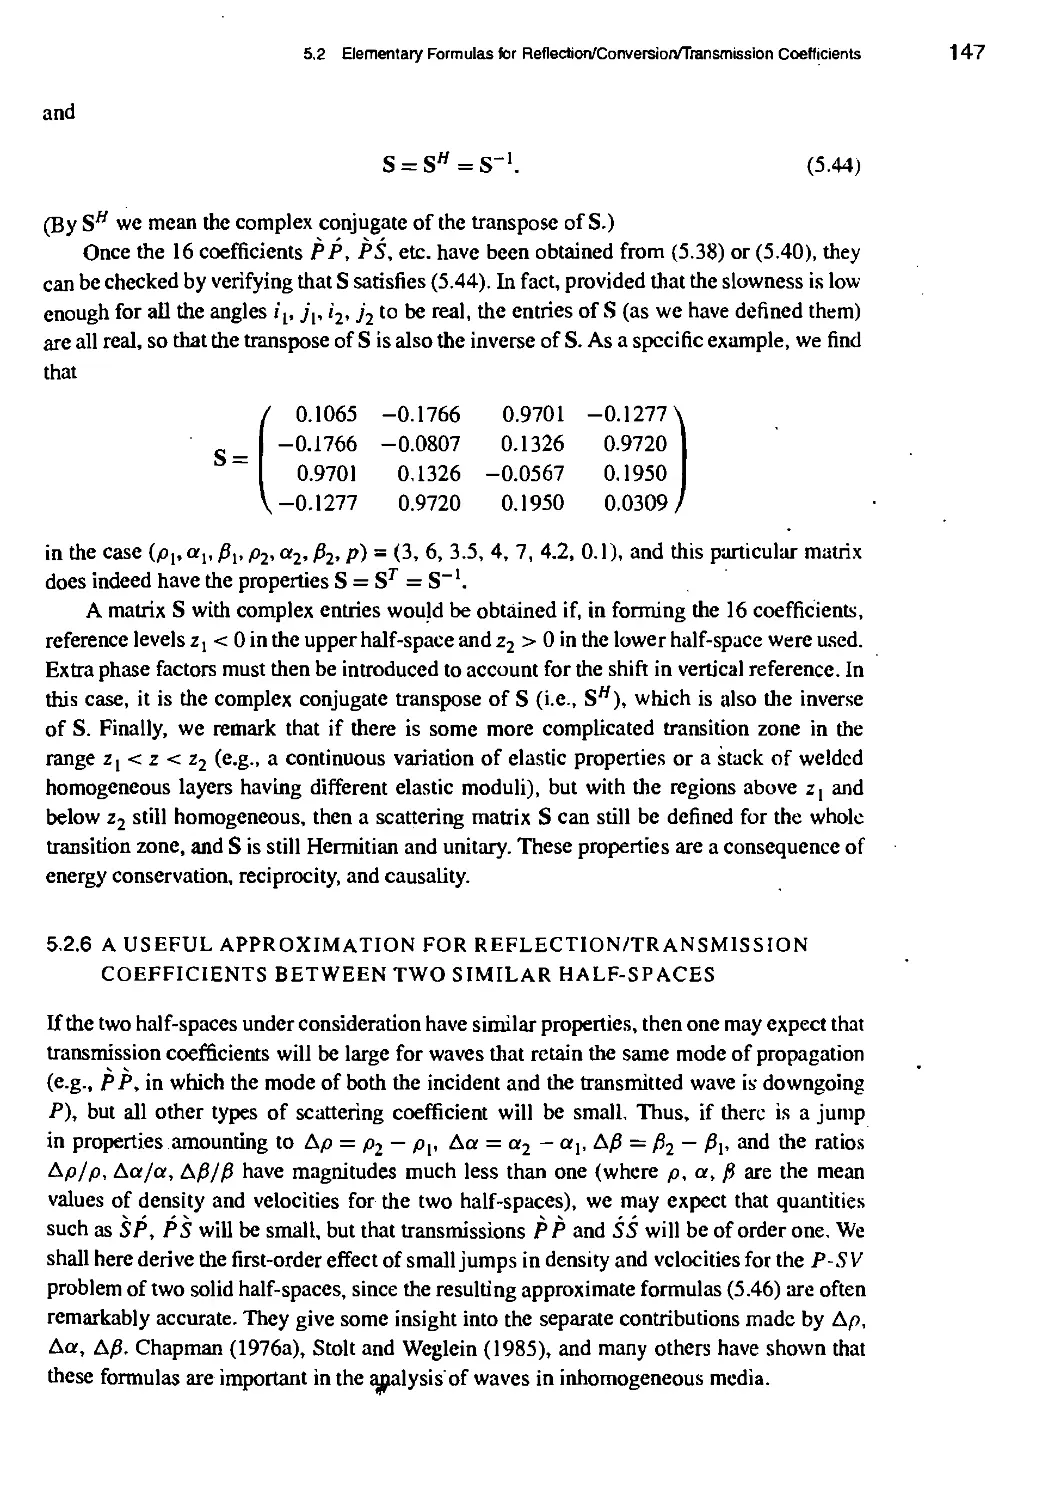 5.2.6 A useful approximation for reflection/transmission coefficients between two similar half-spaces